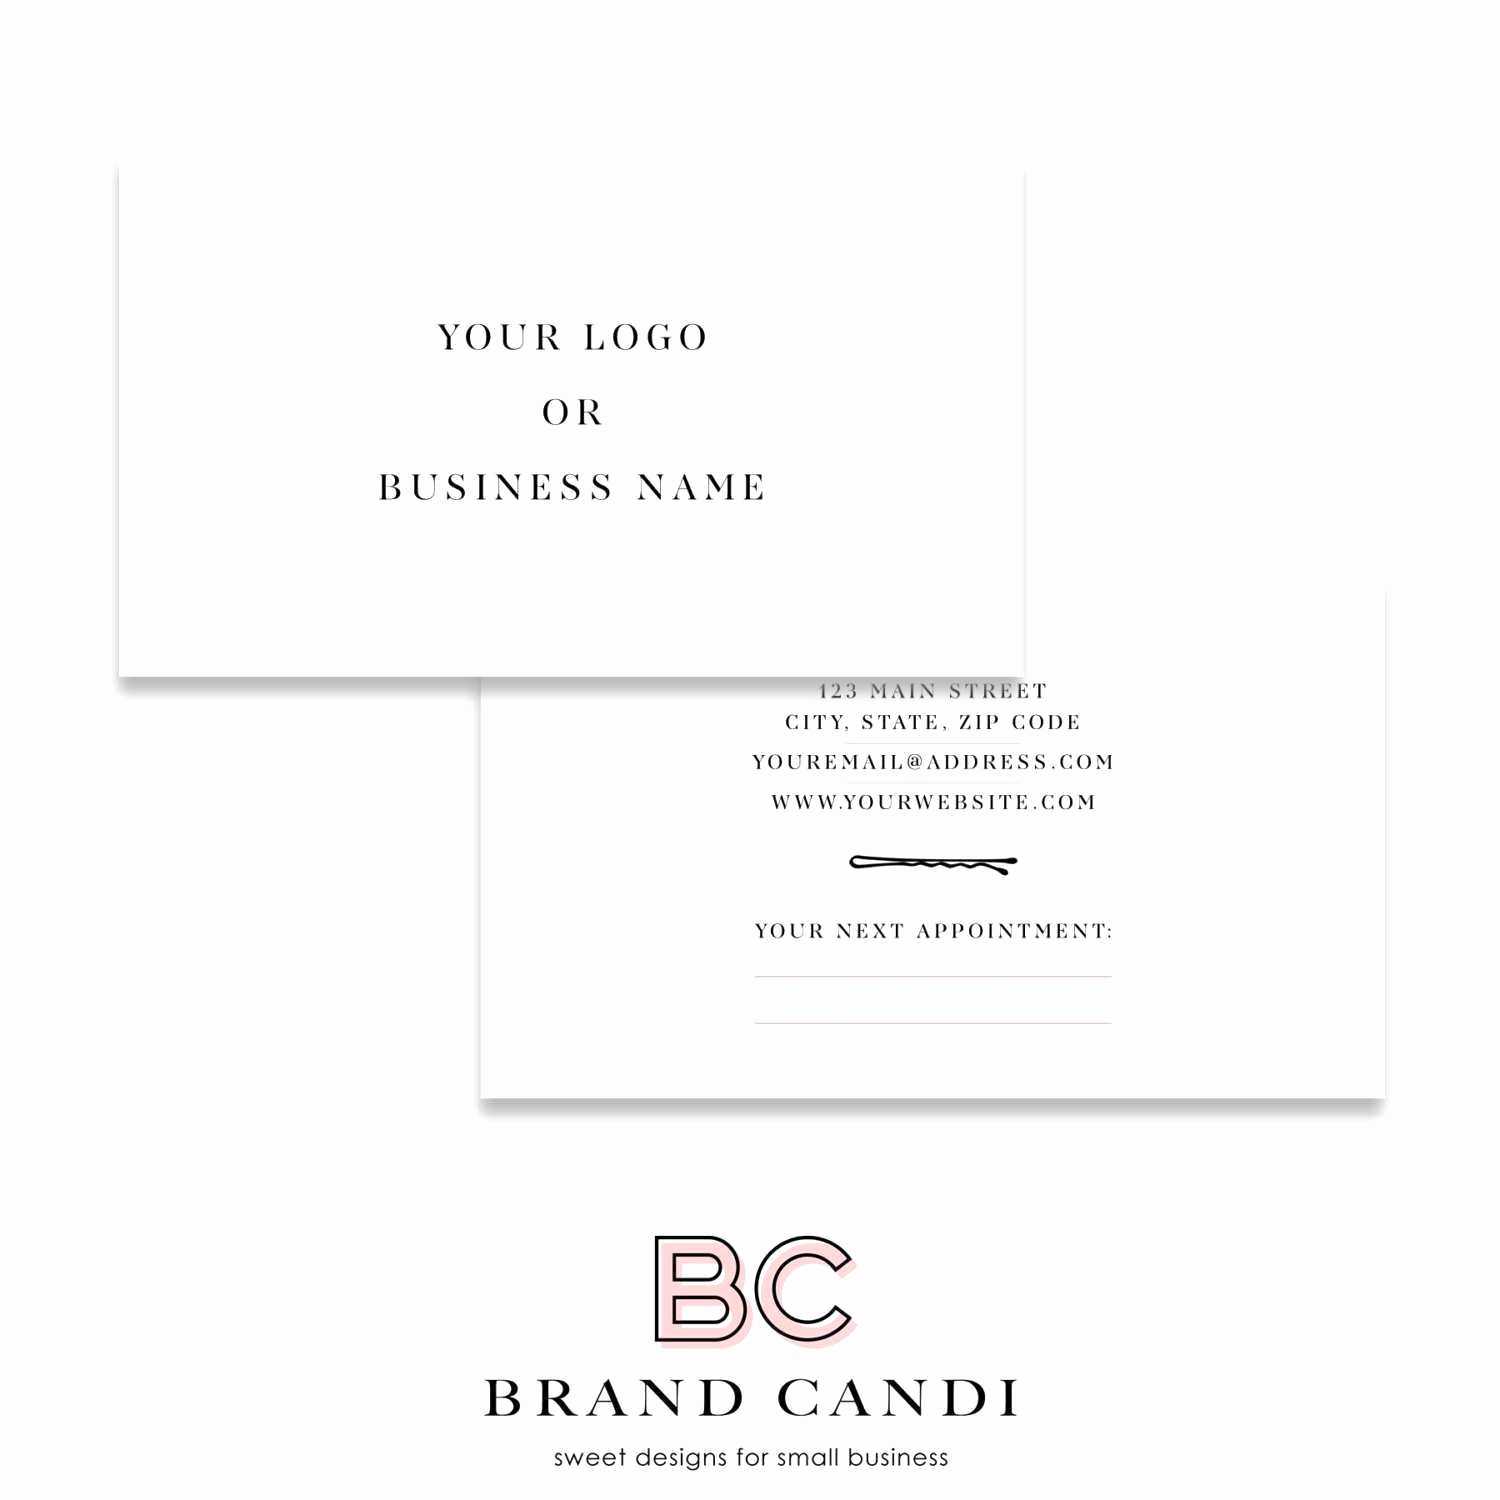 Phd Business Card Sample Phd Student Business Card Template For Graduate Student Business Cards Template